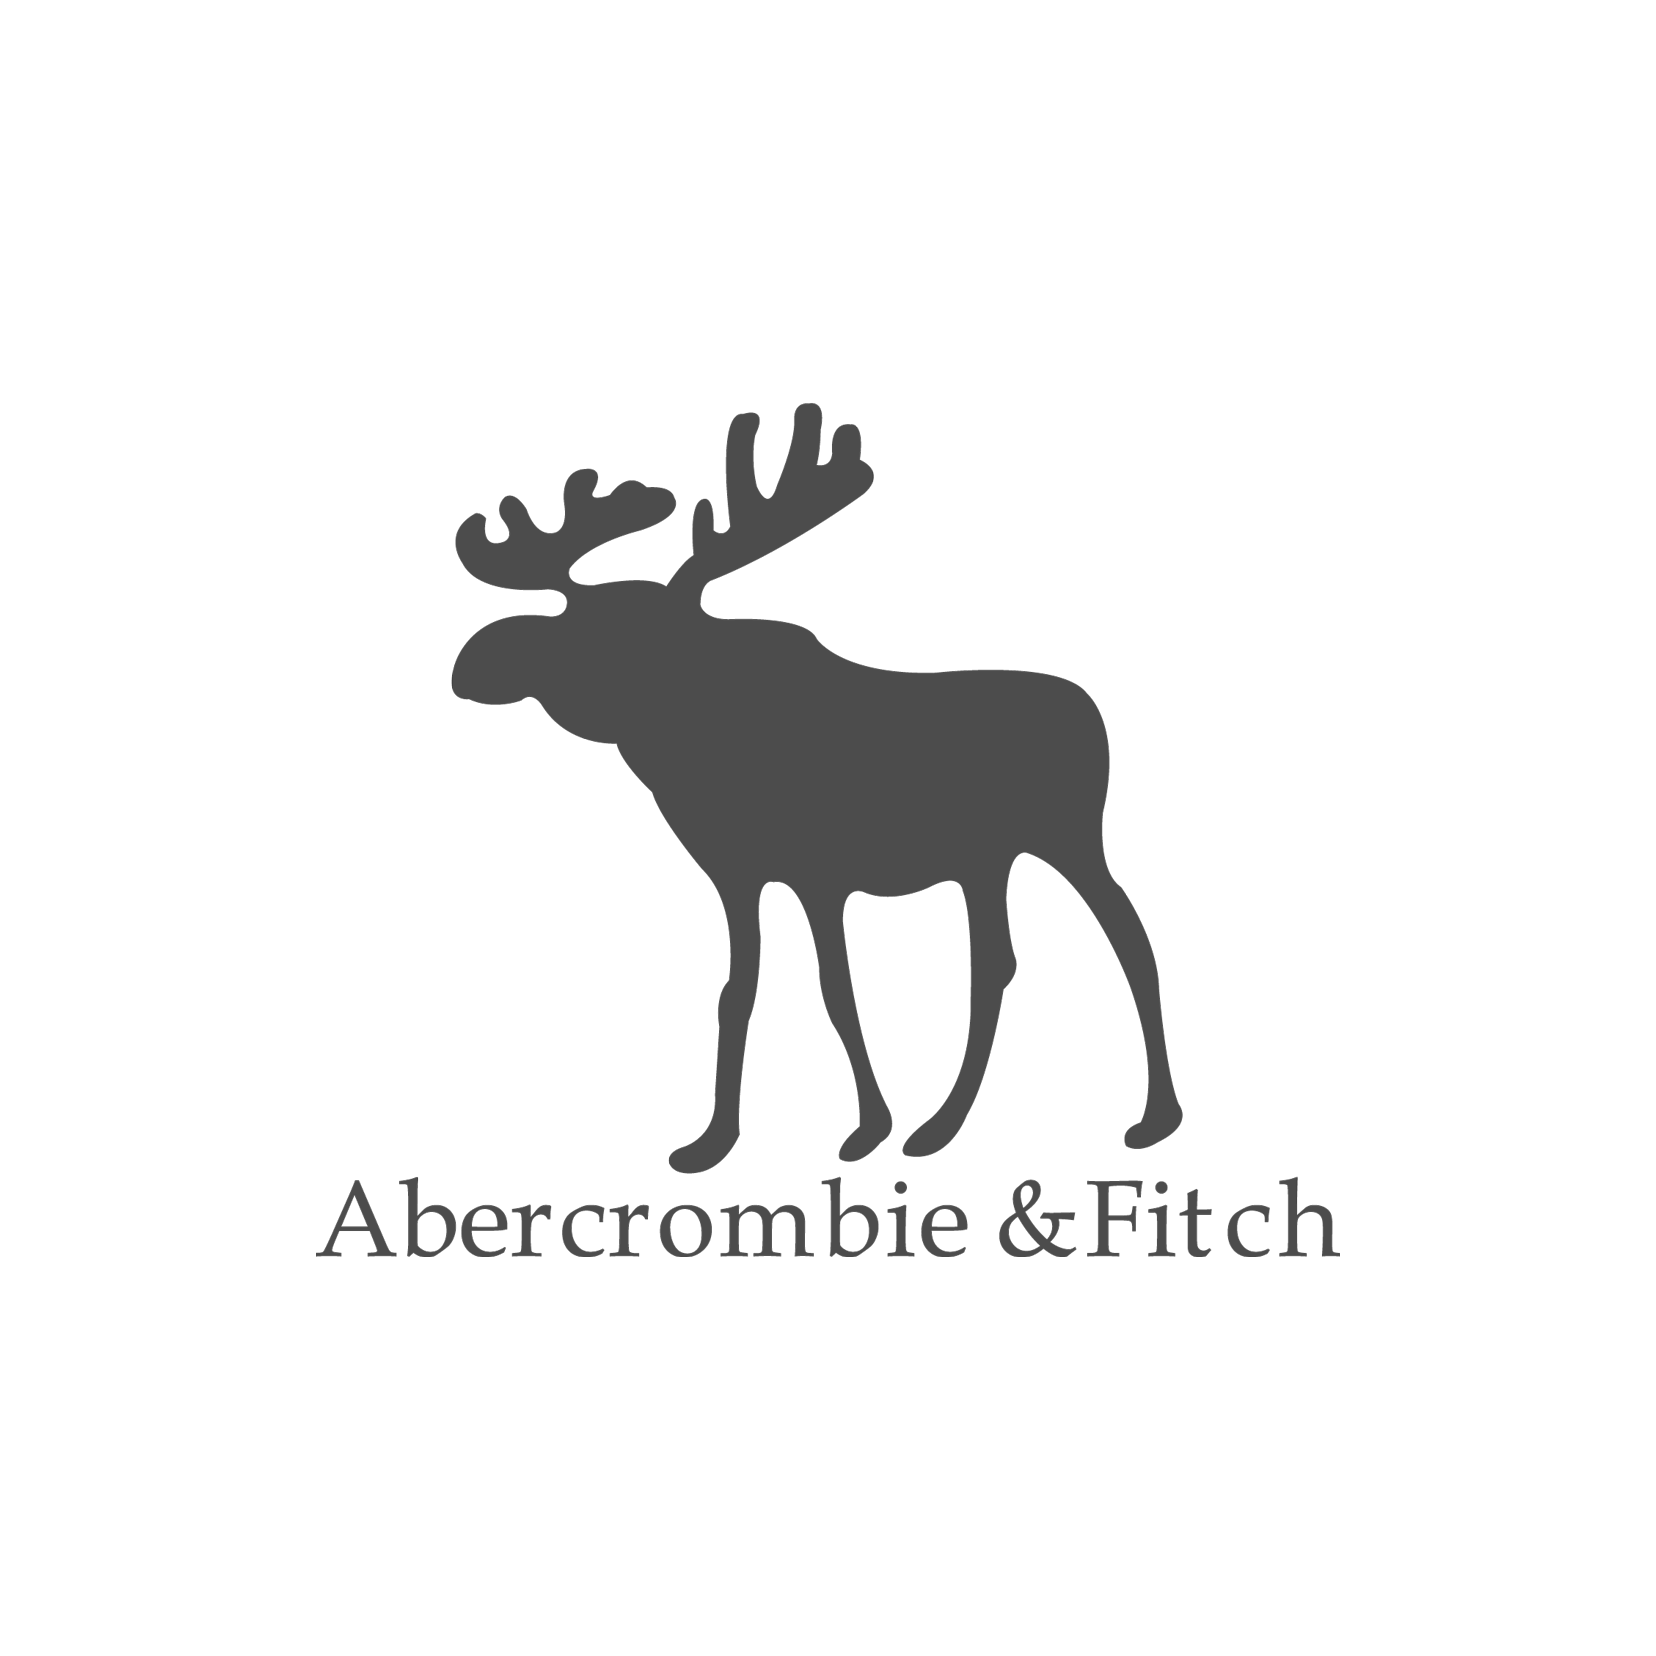 Abercrombie-and-Fitch-logo.png